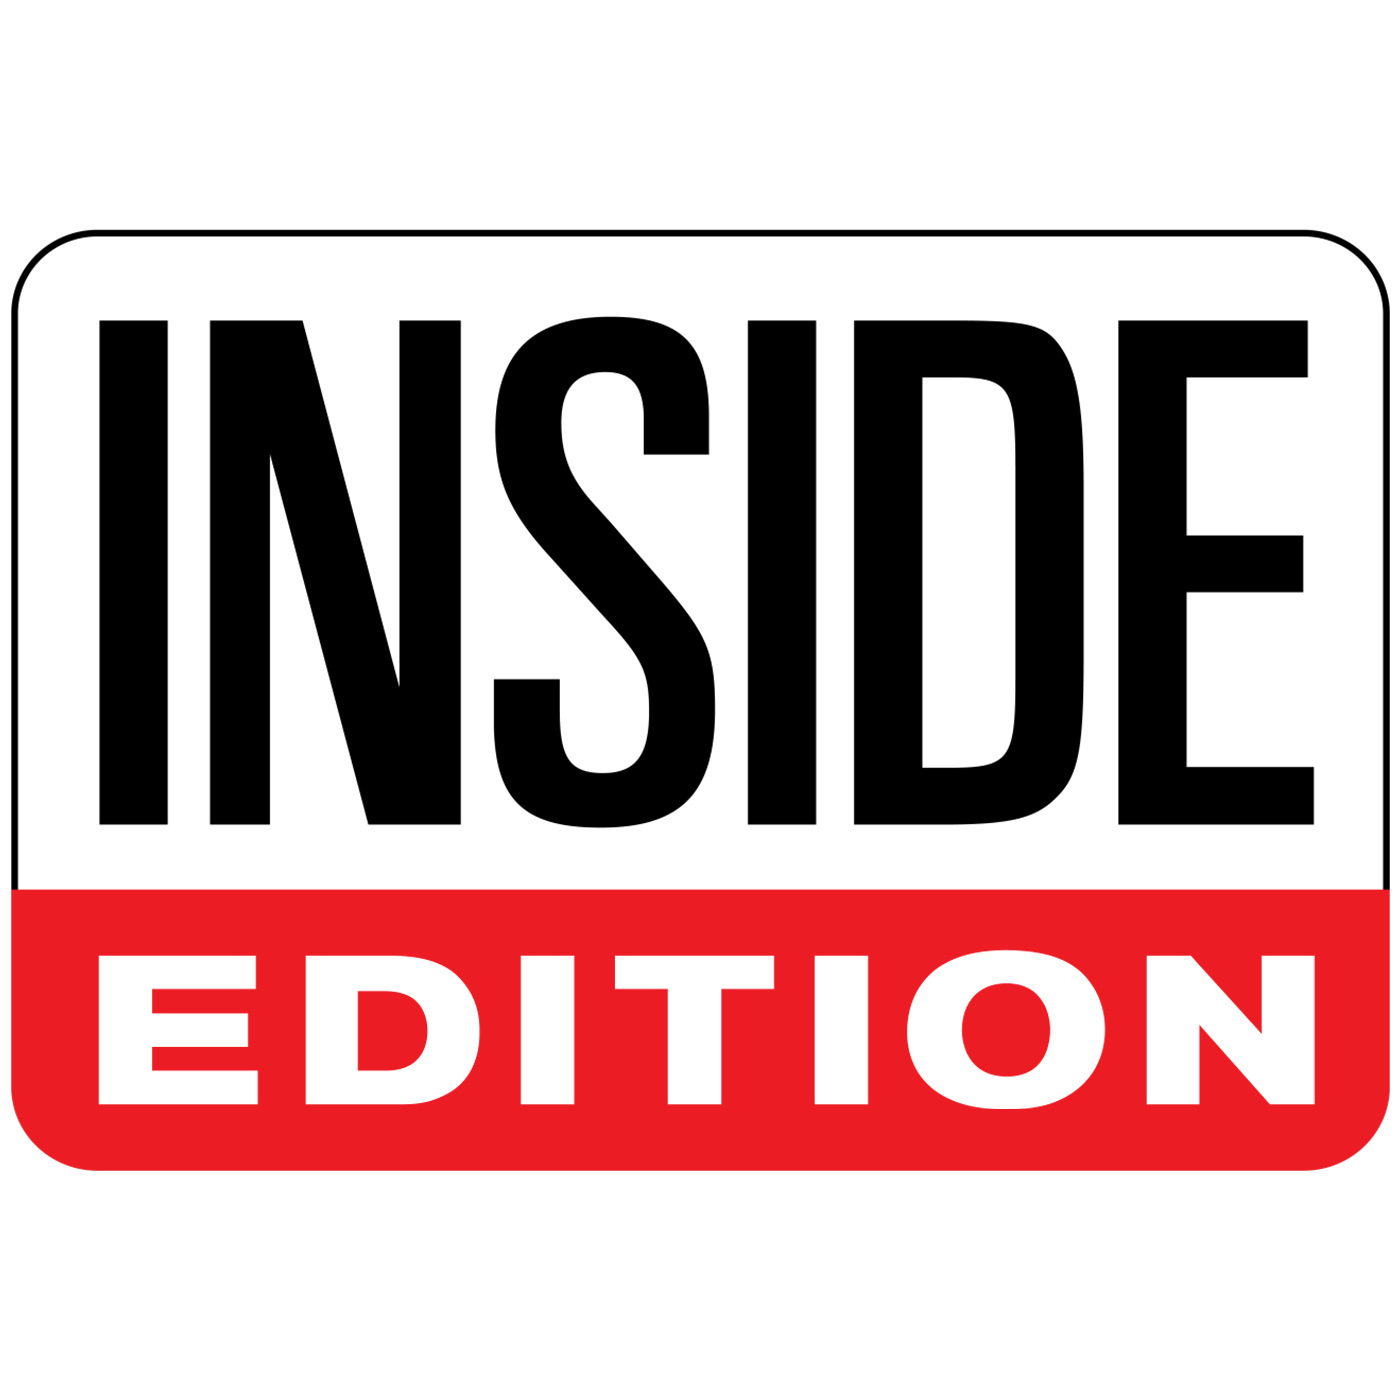 Inside Edition: Inside Report for Friday, 12/6/19